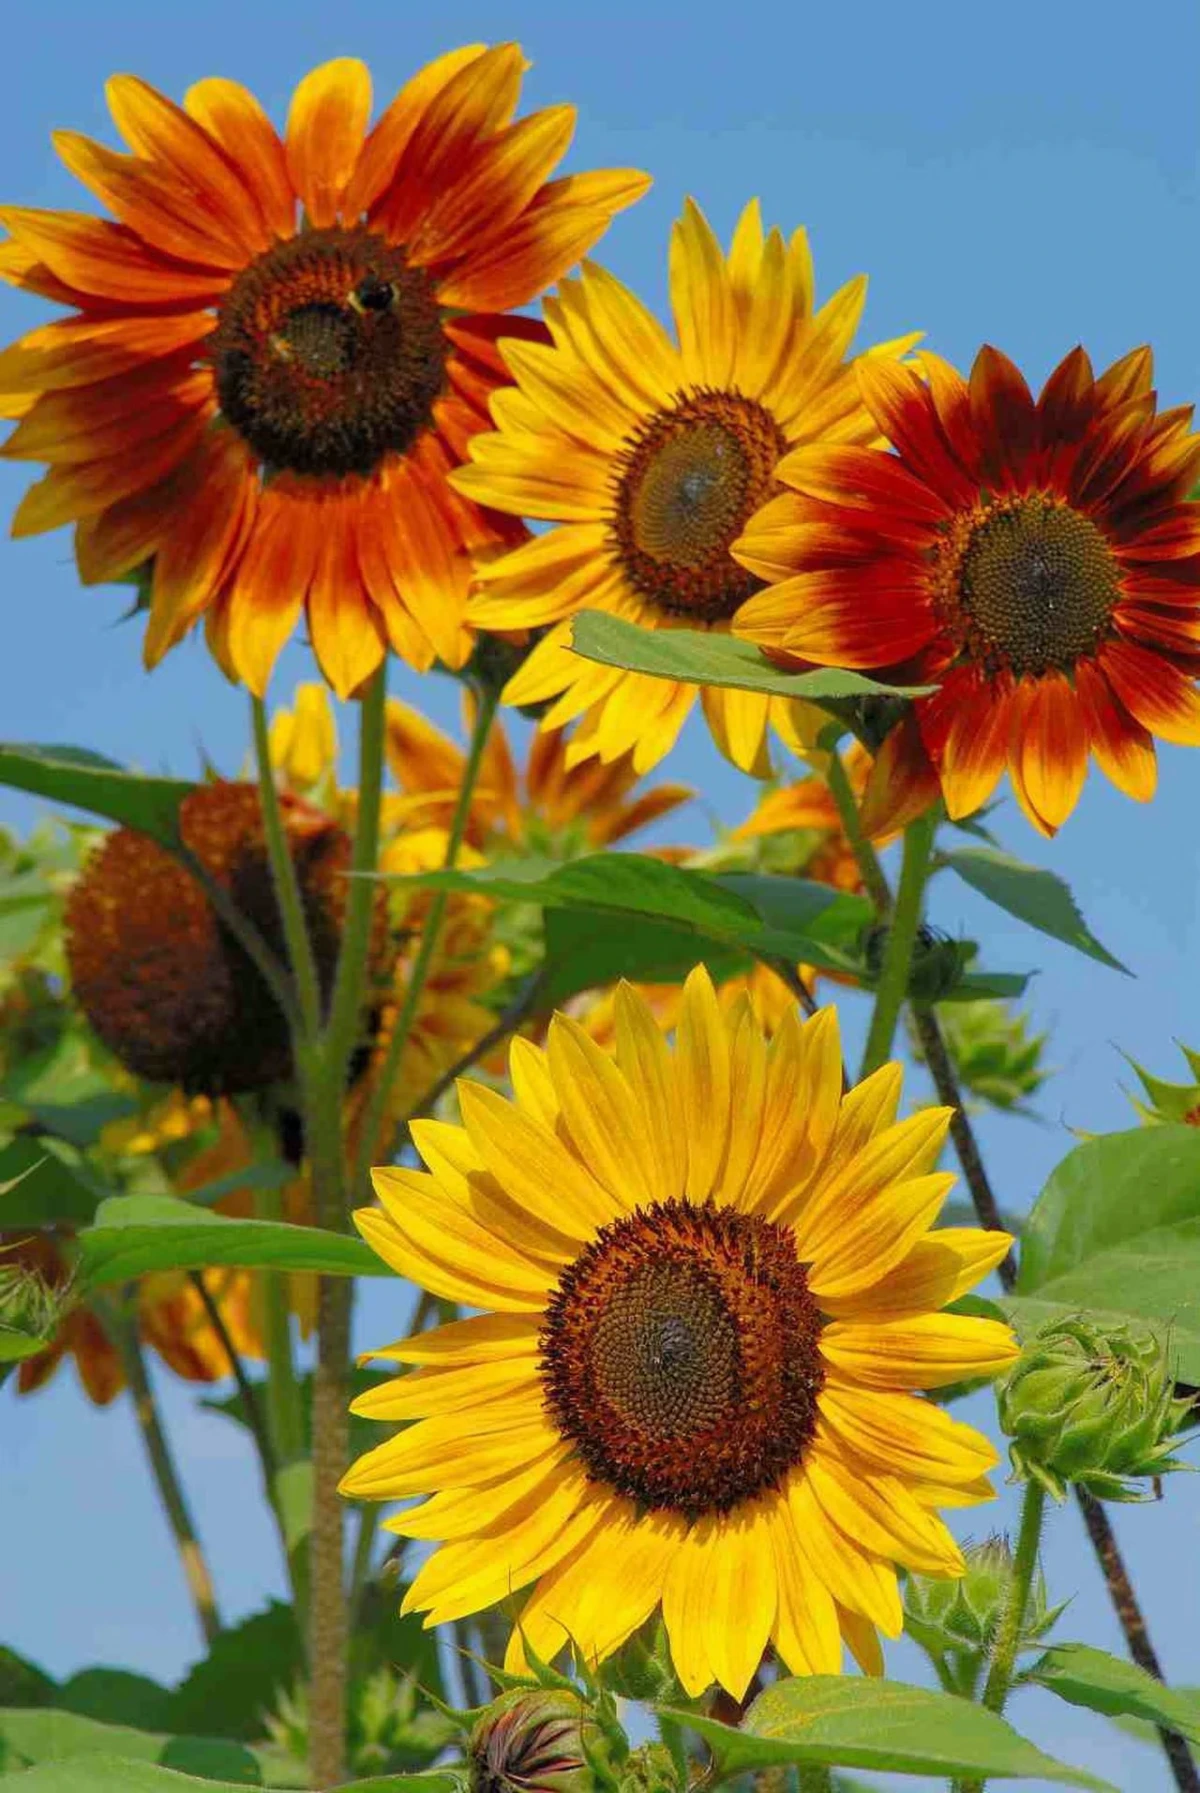 different colored sunflowers in yellow and red